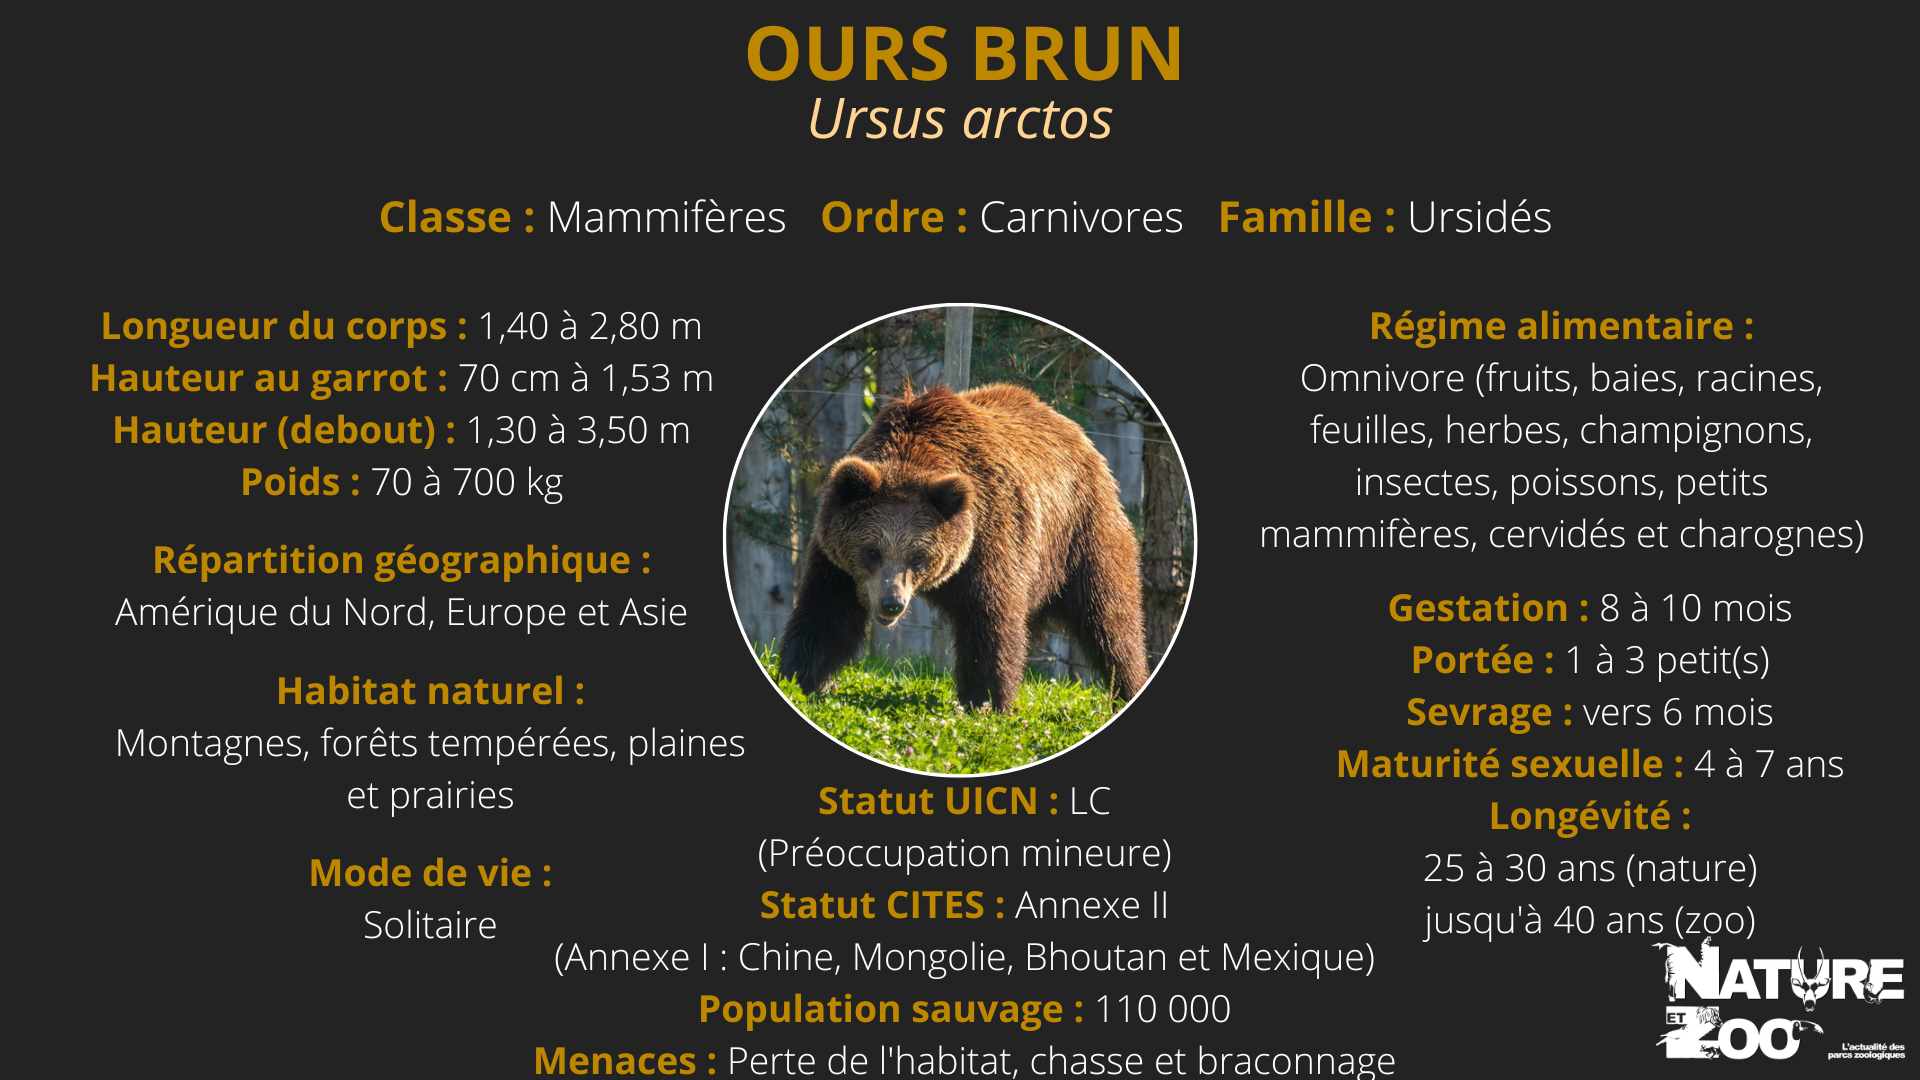 Ours brun - Nature et Zoo